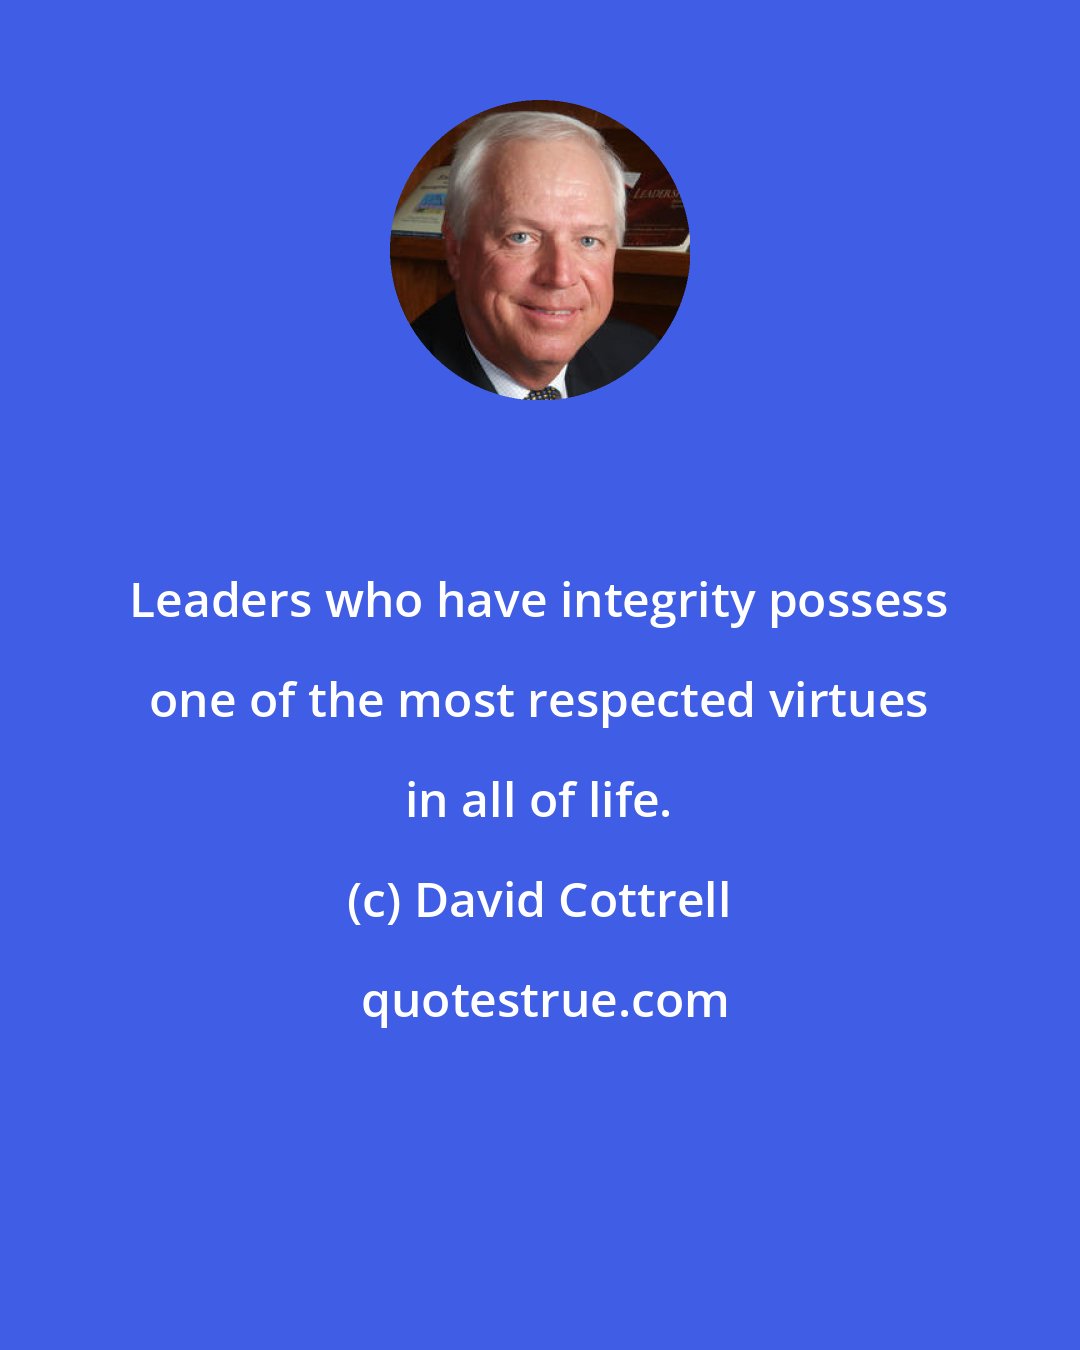 David Cottrell: Leaders who have integrity possess one of the most respected virtues in all of life.